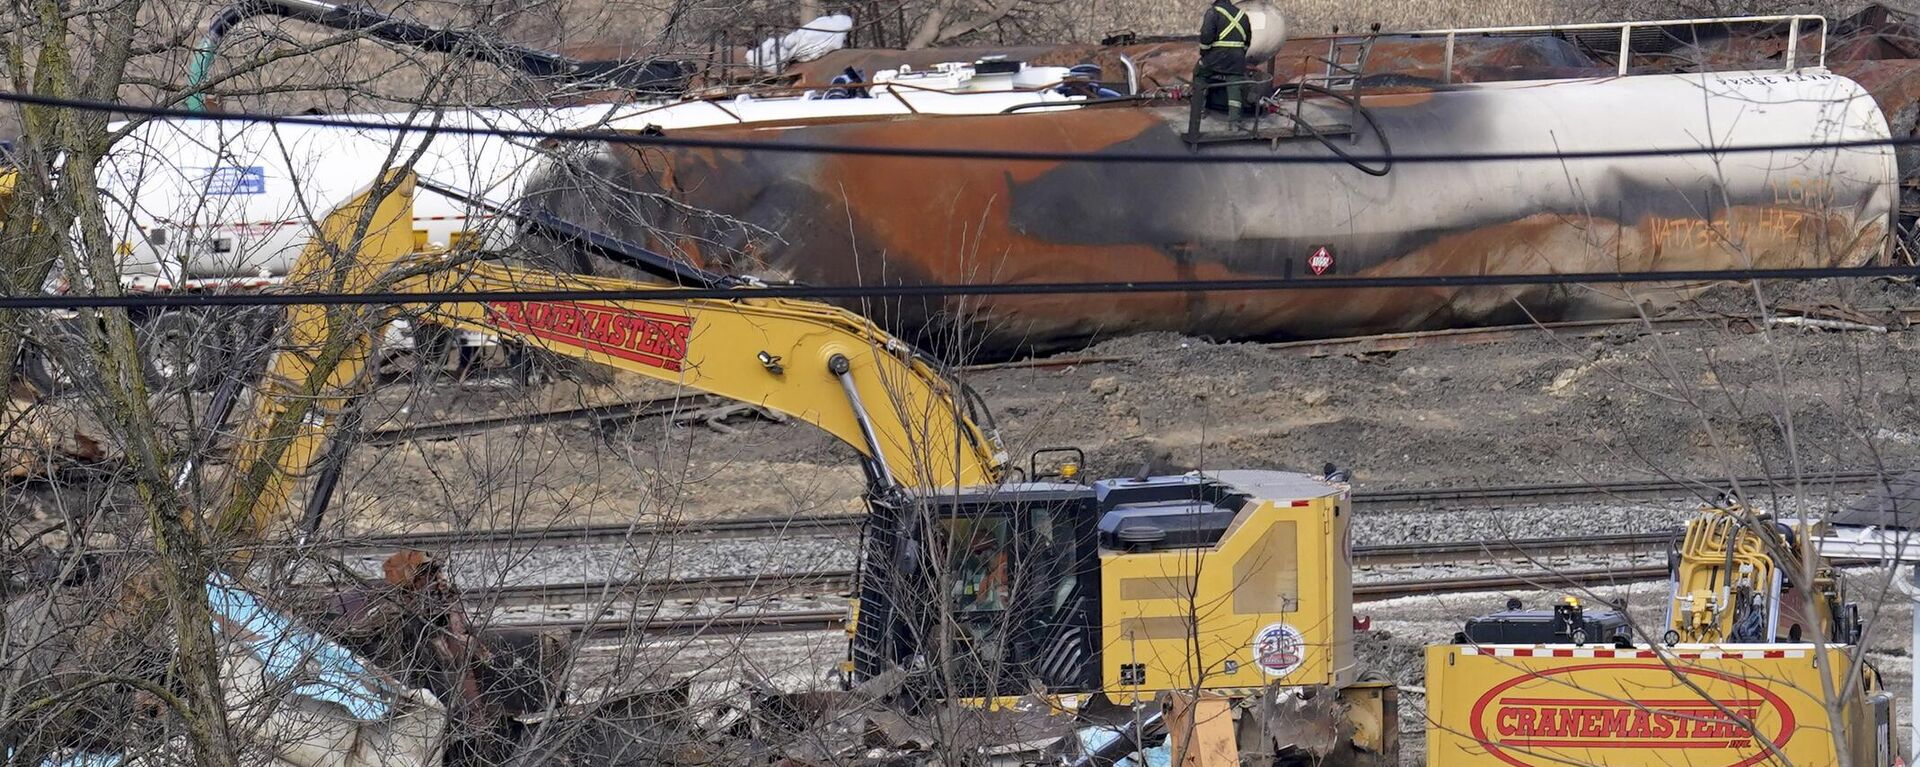 Workers continue to clean up remaining tank cars, Tuesday, Feb. 21, 2023, in East Palestine, Ohio, following the Feb. 3 Norfolk Southern freight train derailment. - Sputnik International, 1920, 03.03.2023